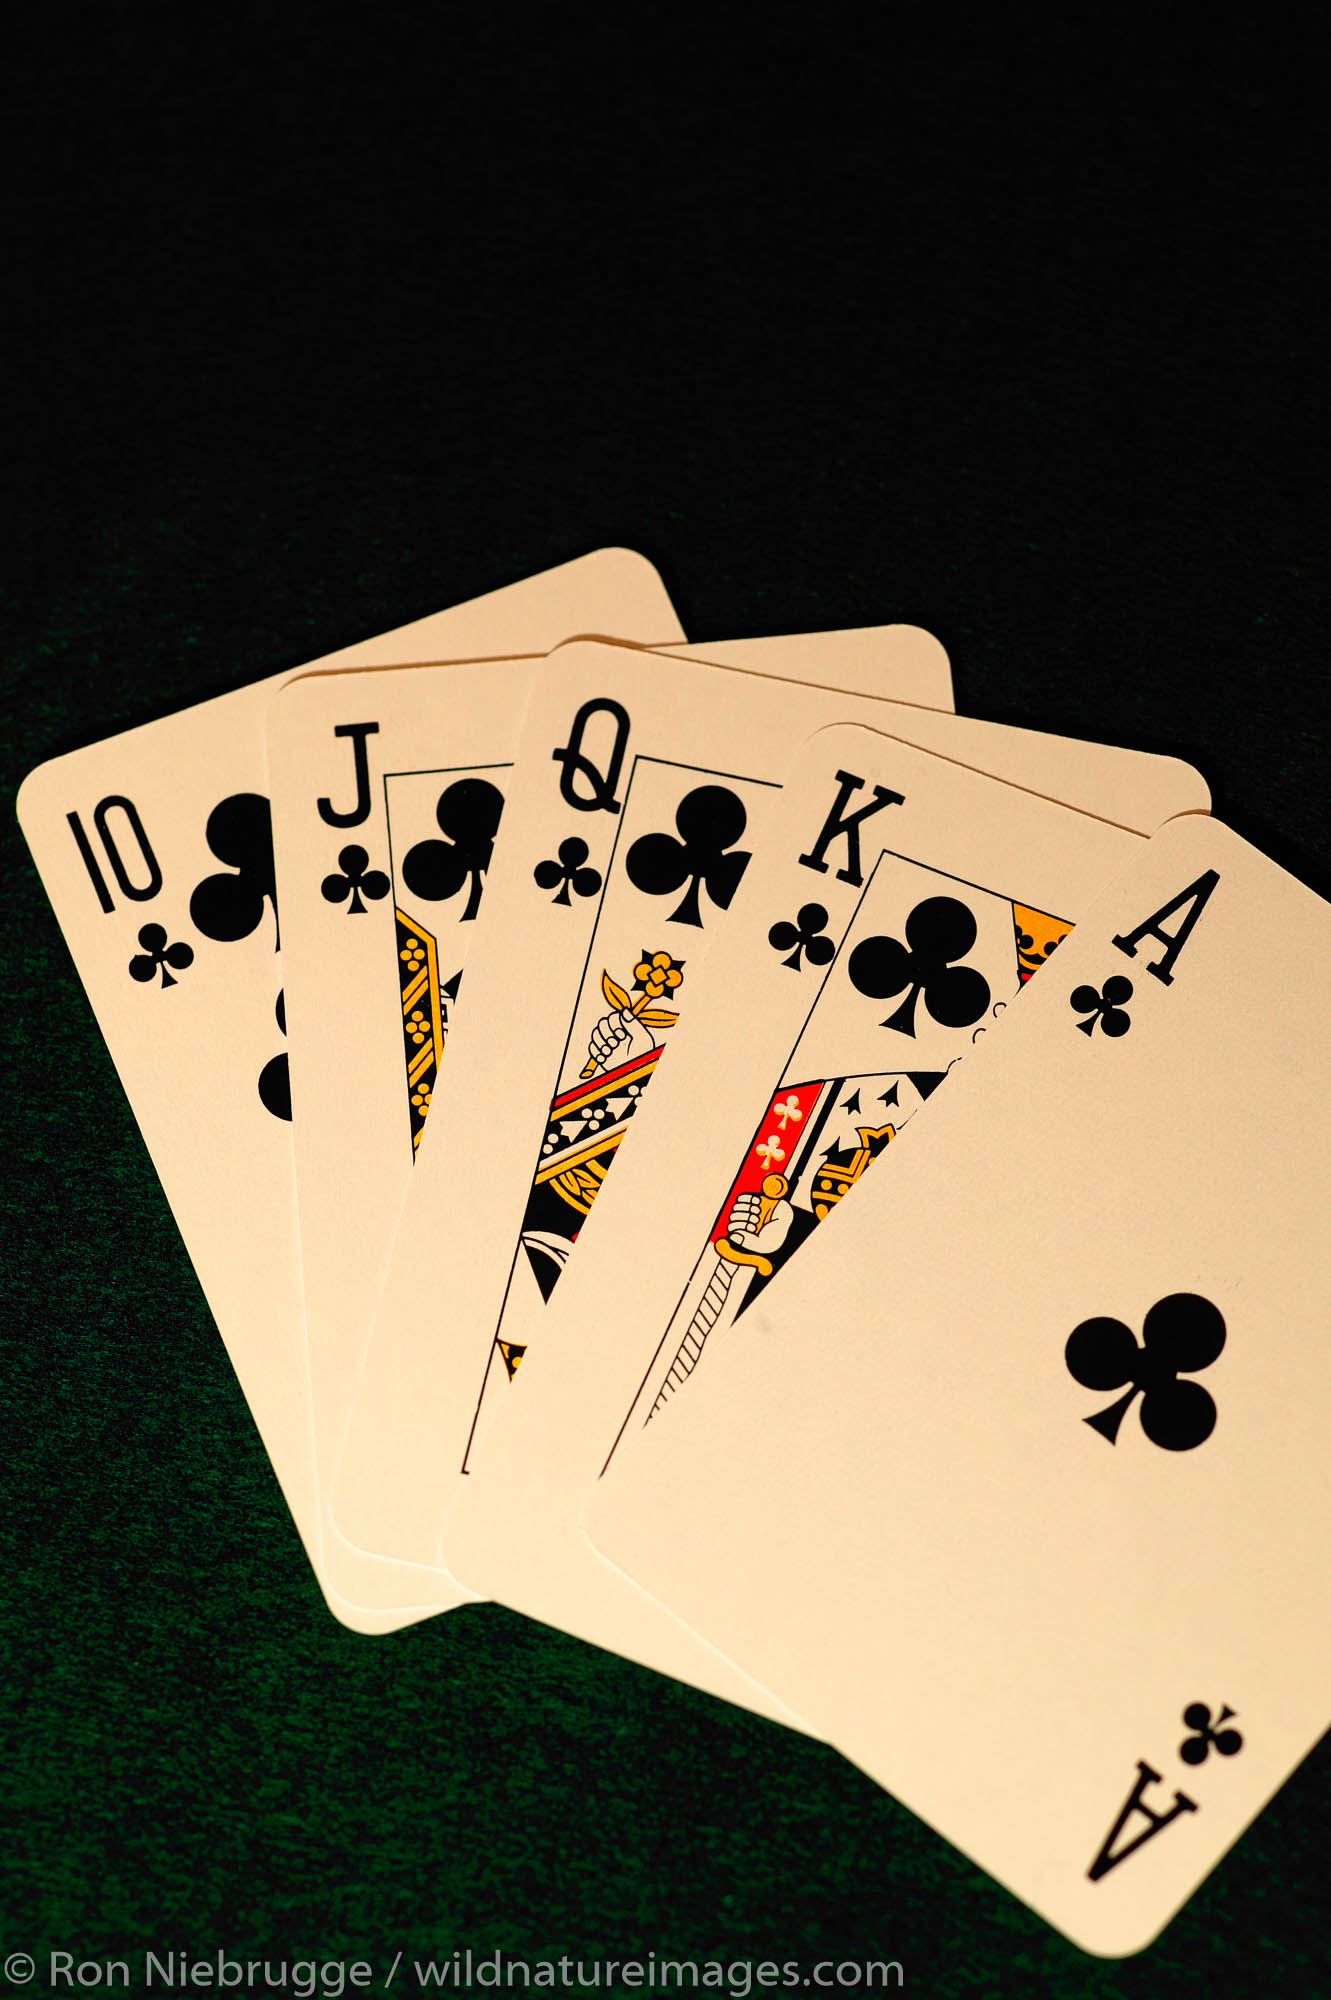 Royal flush, the best possible five card hand in poker.